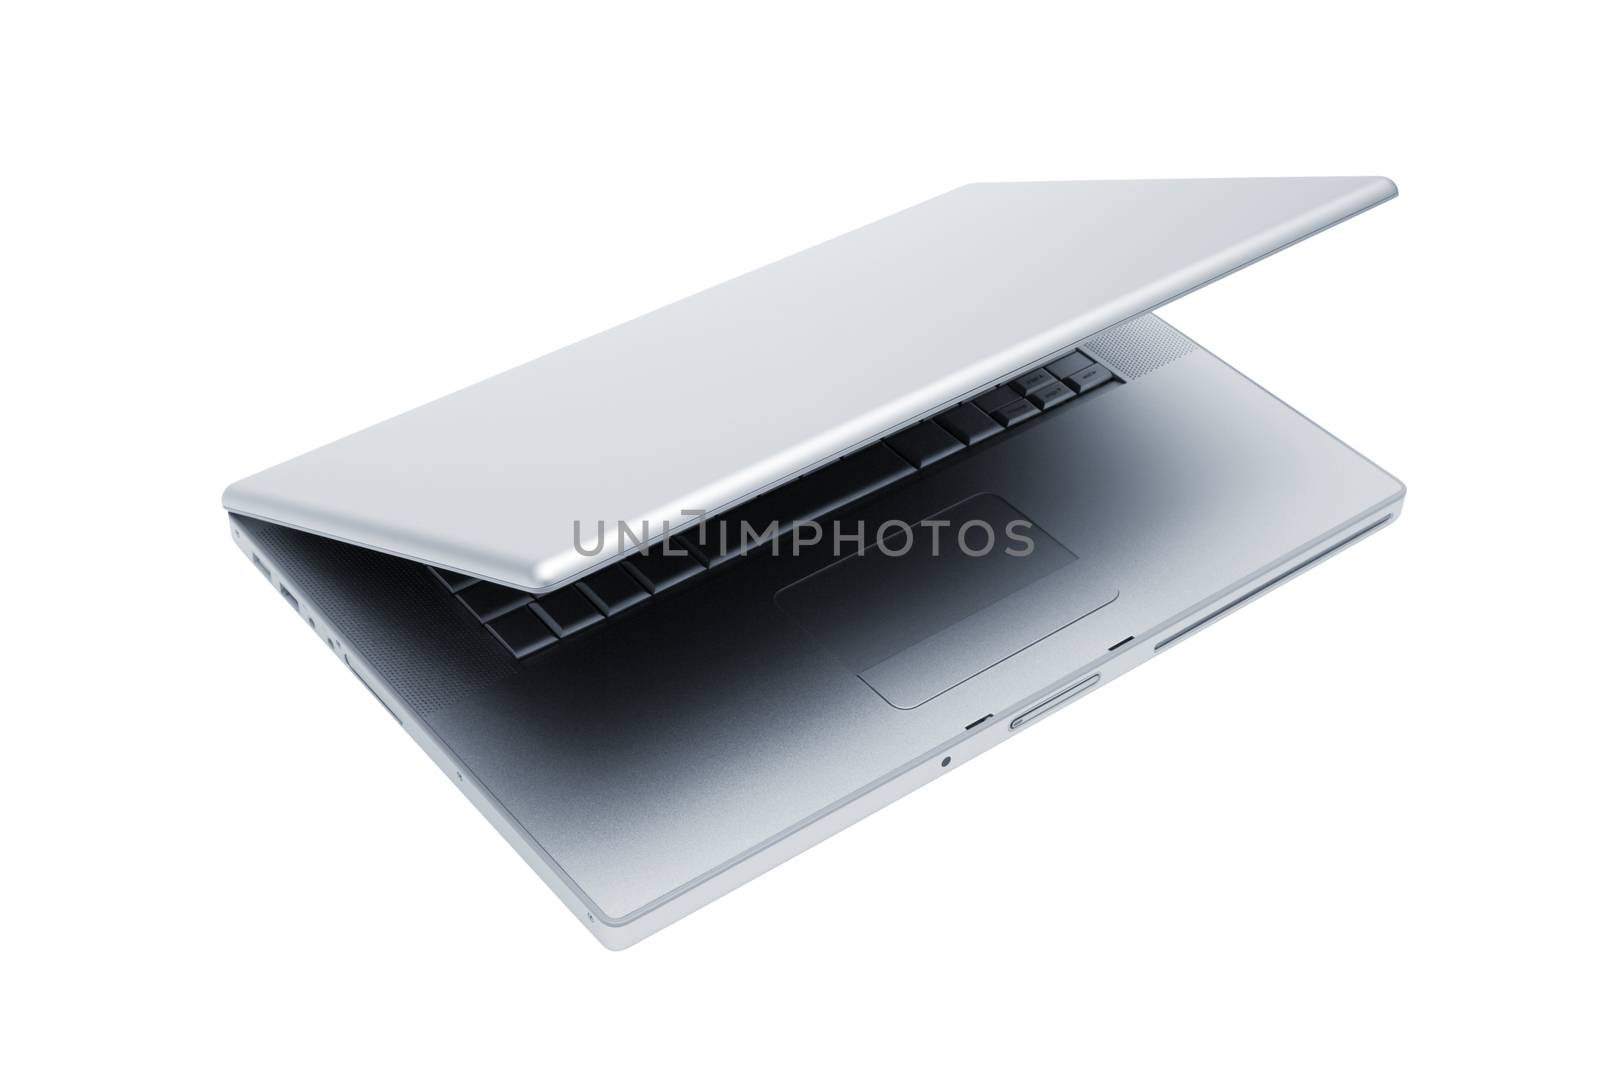 Modern and stylish laptop on a white background 